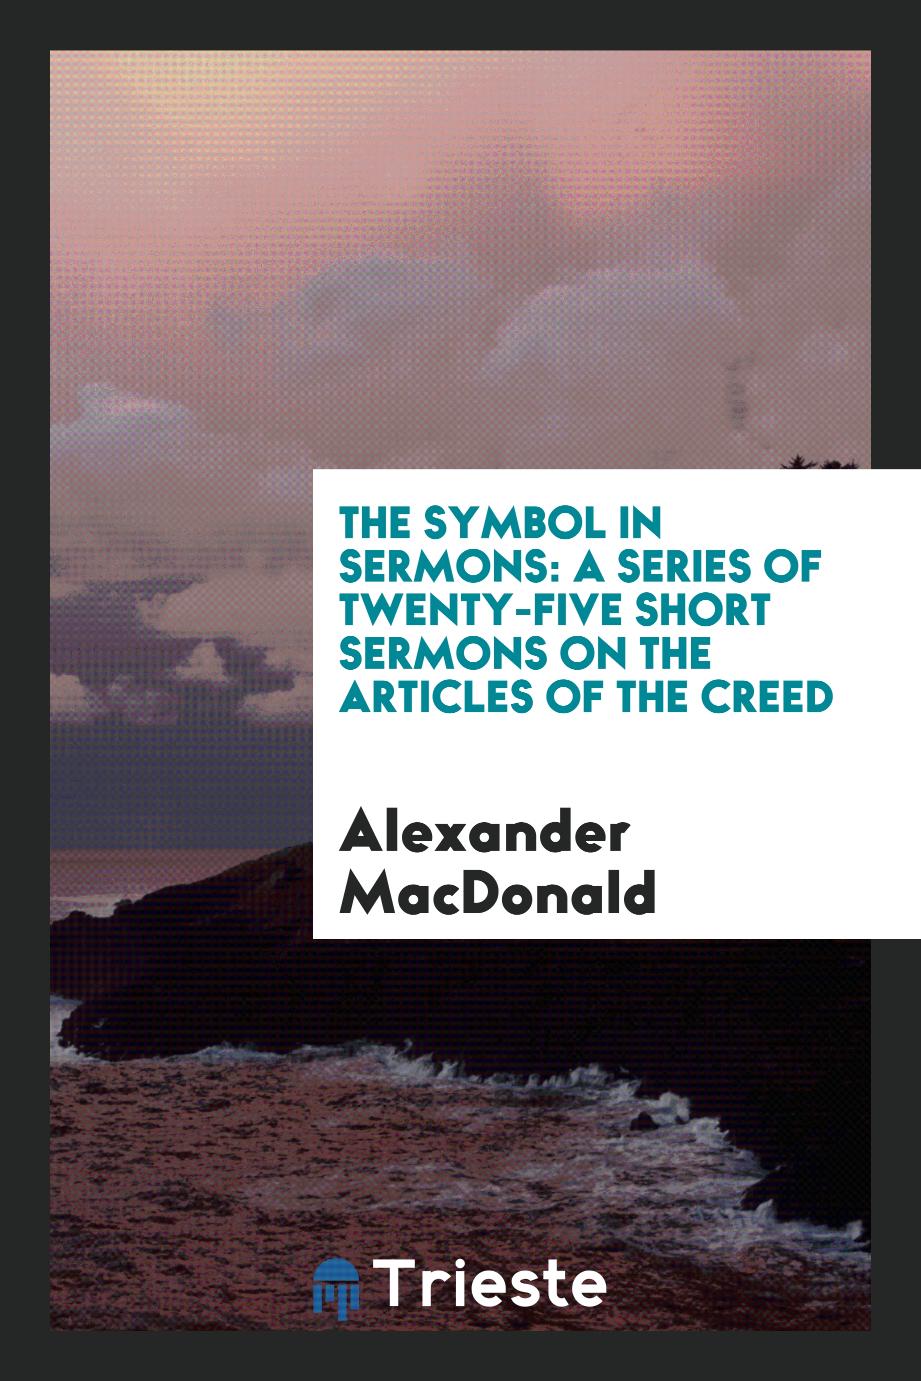 The symbol in sermons: a series of twenty-five short sermons on the articles of the Creed